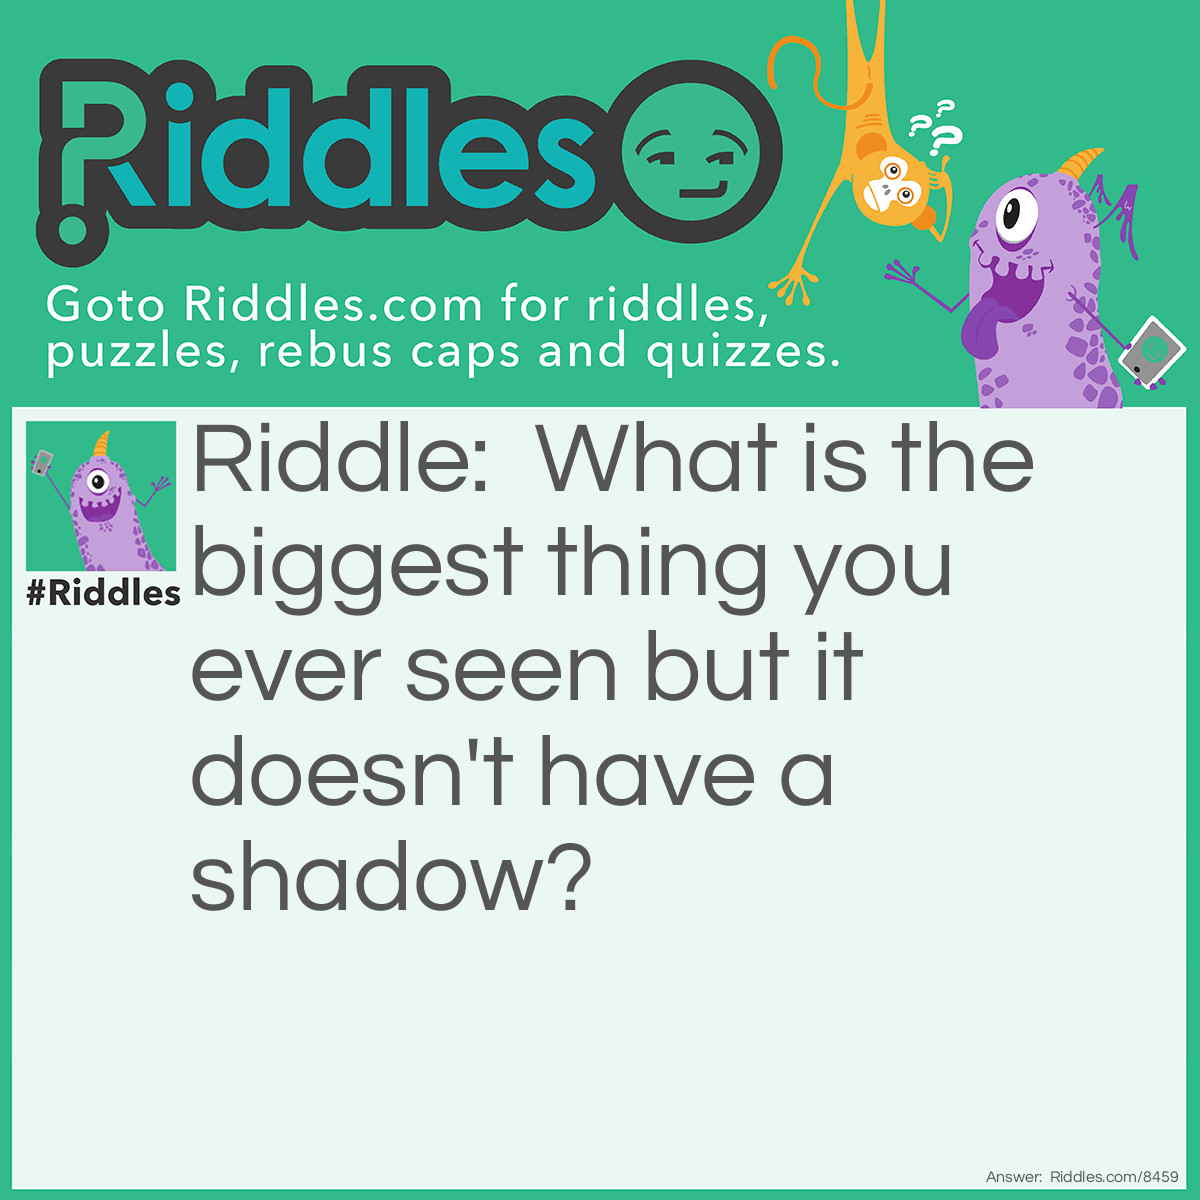 Riddle: What is the biggest thing you ever seen but it doesn't have a shadow? Answer: The sun.